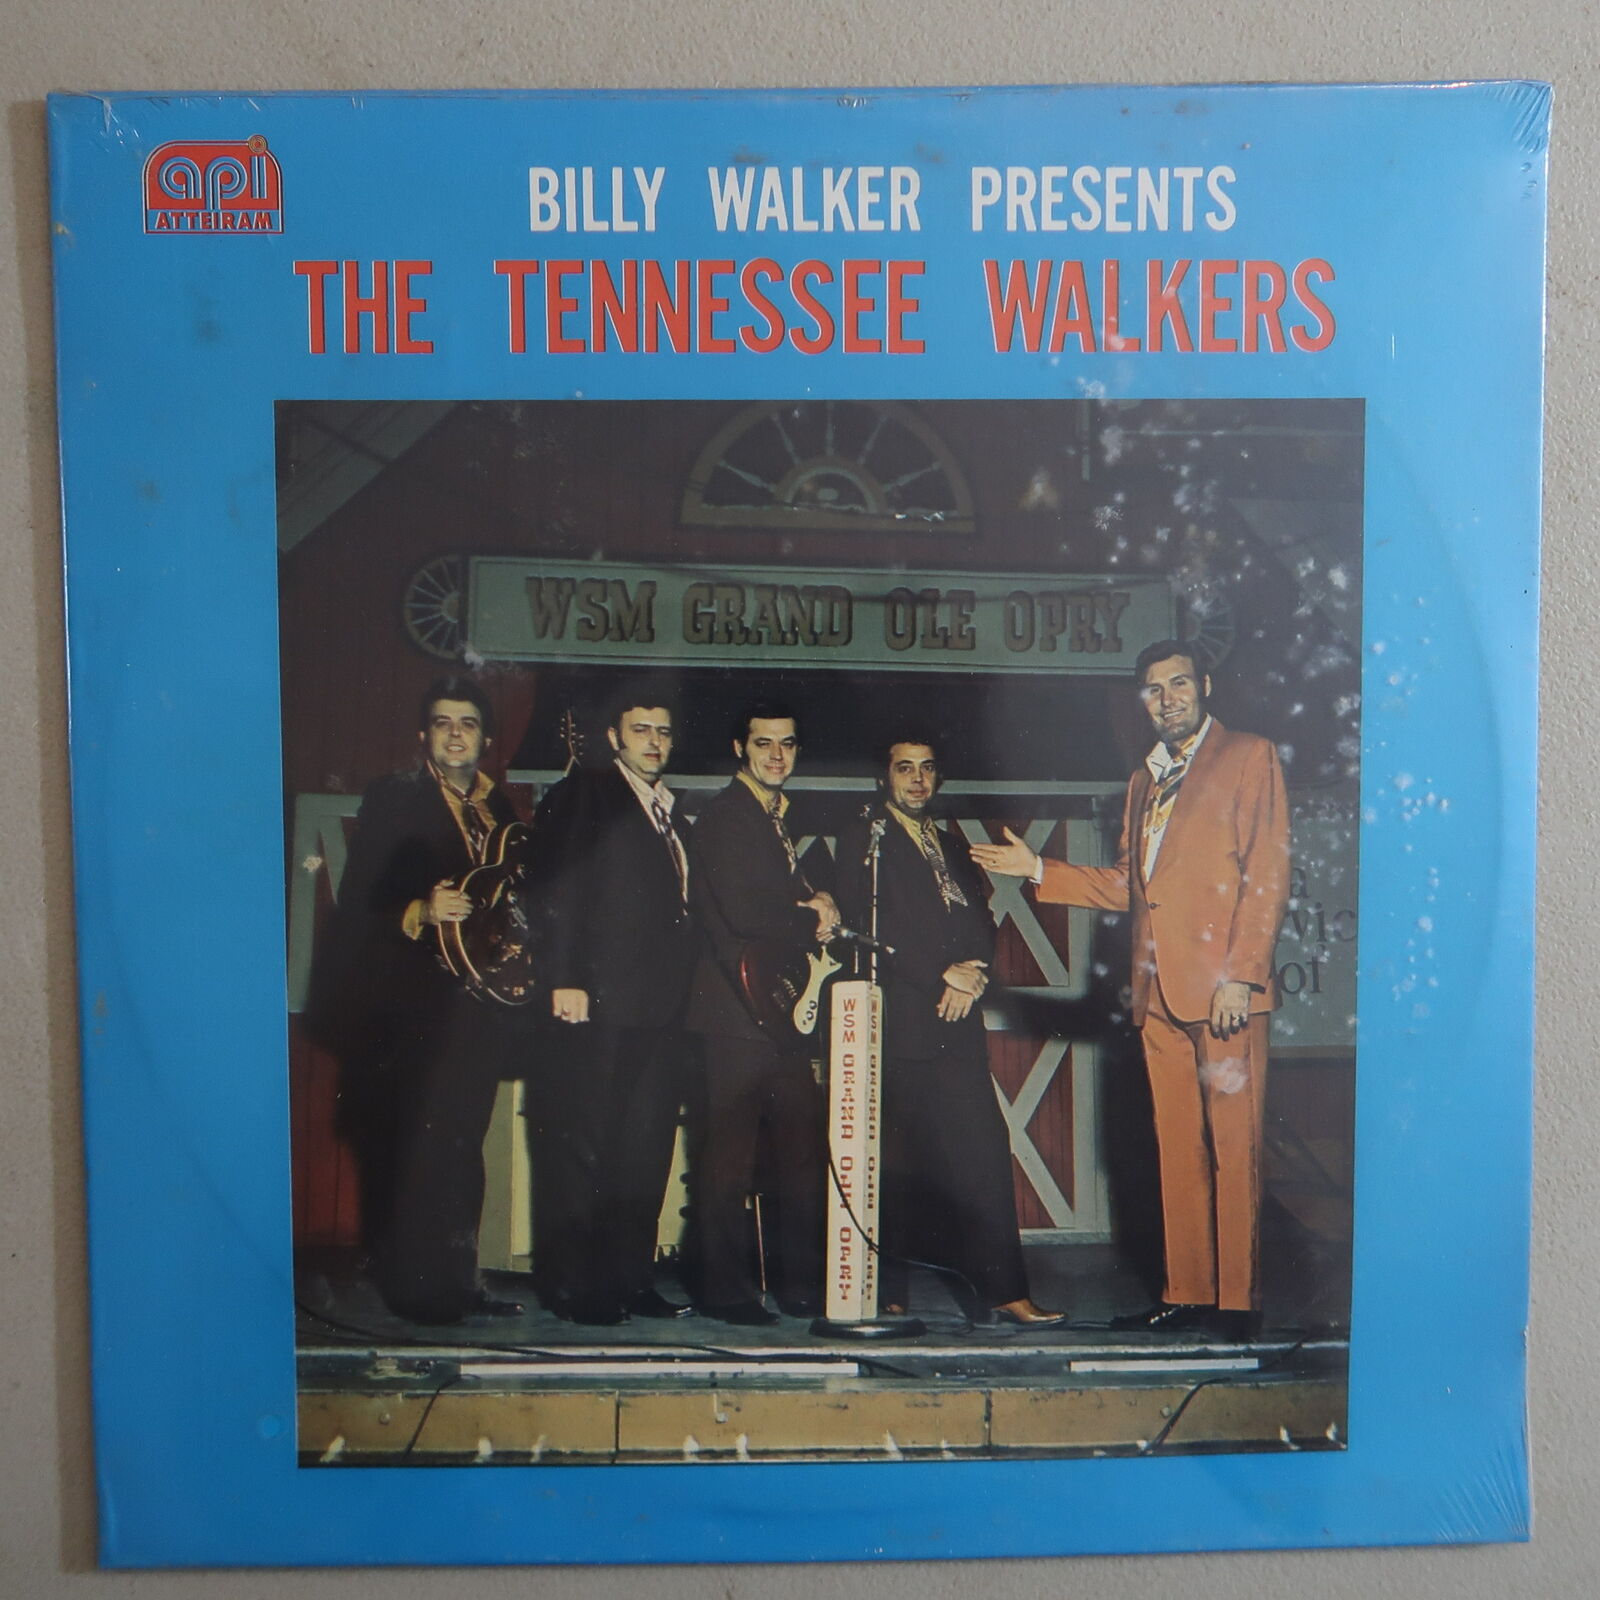 RARE BILLY WALKER THE TENNESSEE WALKERS VINYL LP API MINT FACTORY SEALED 38